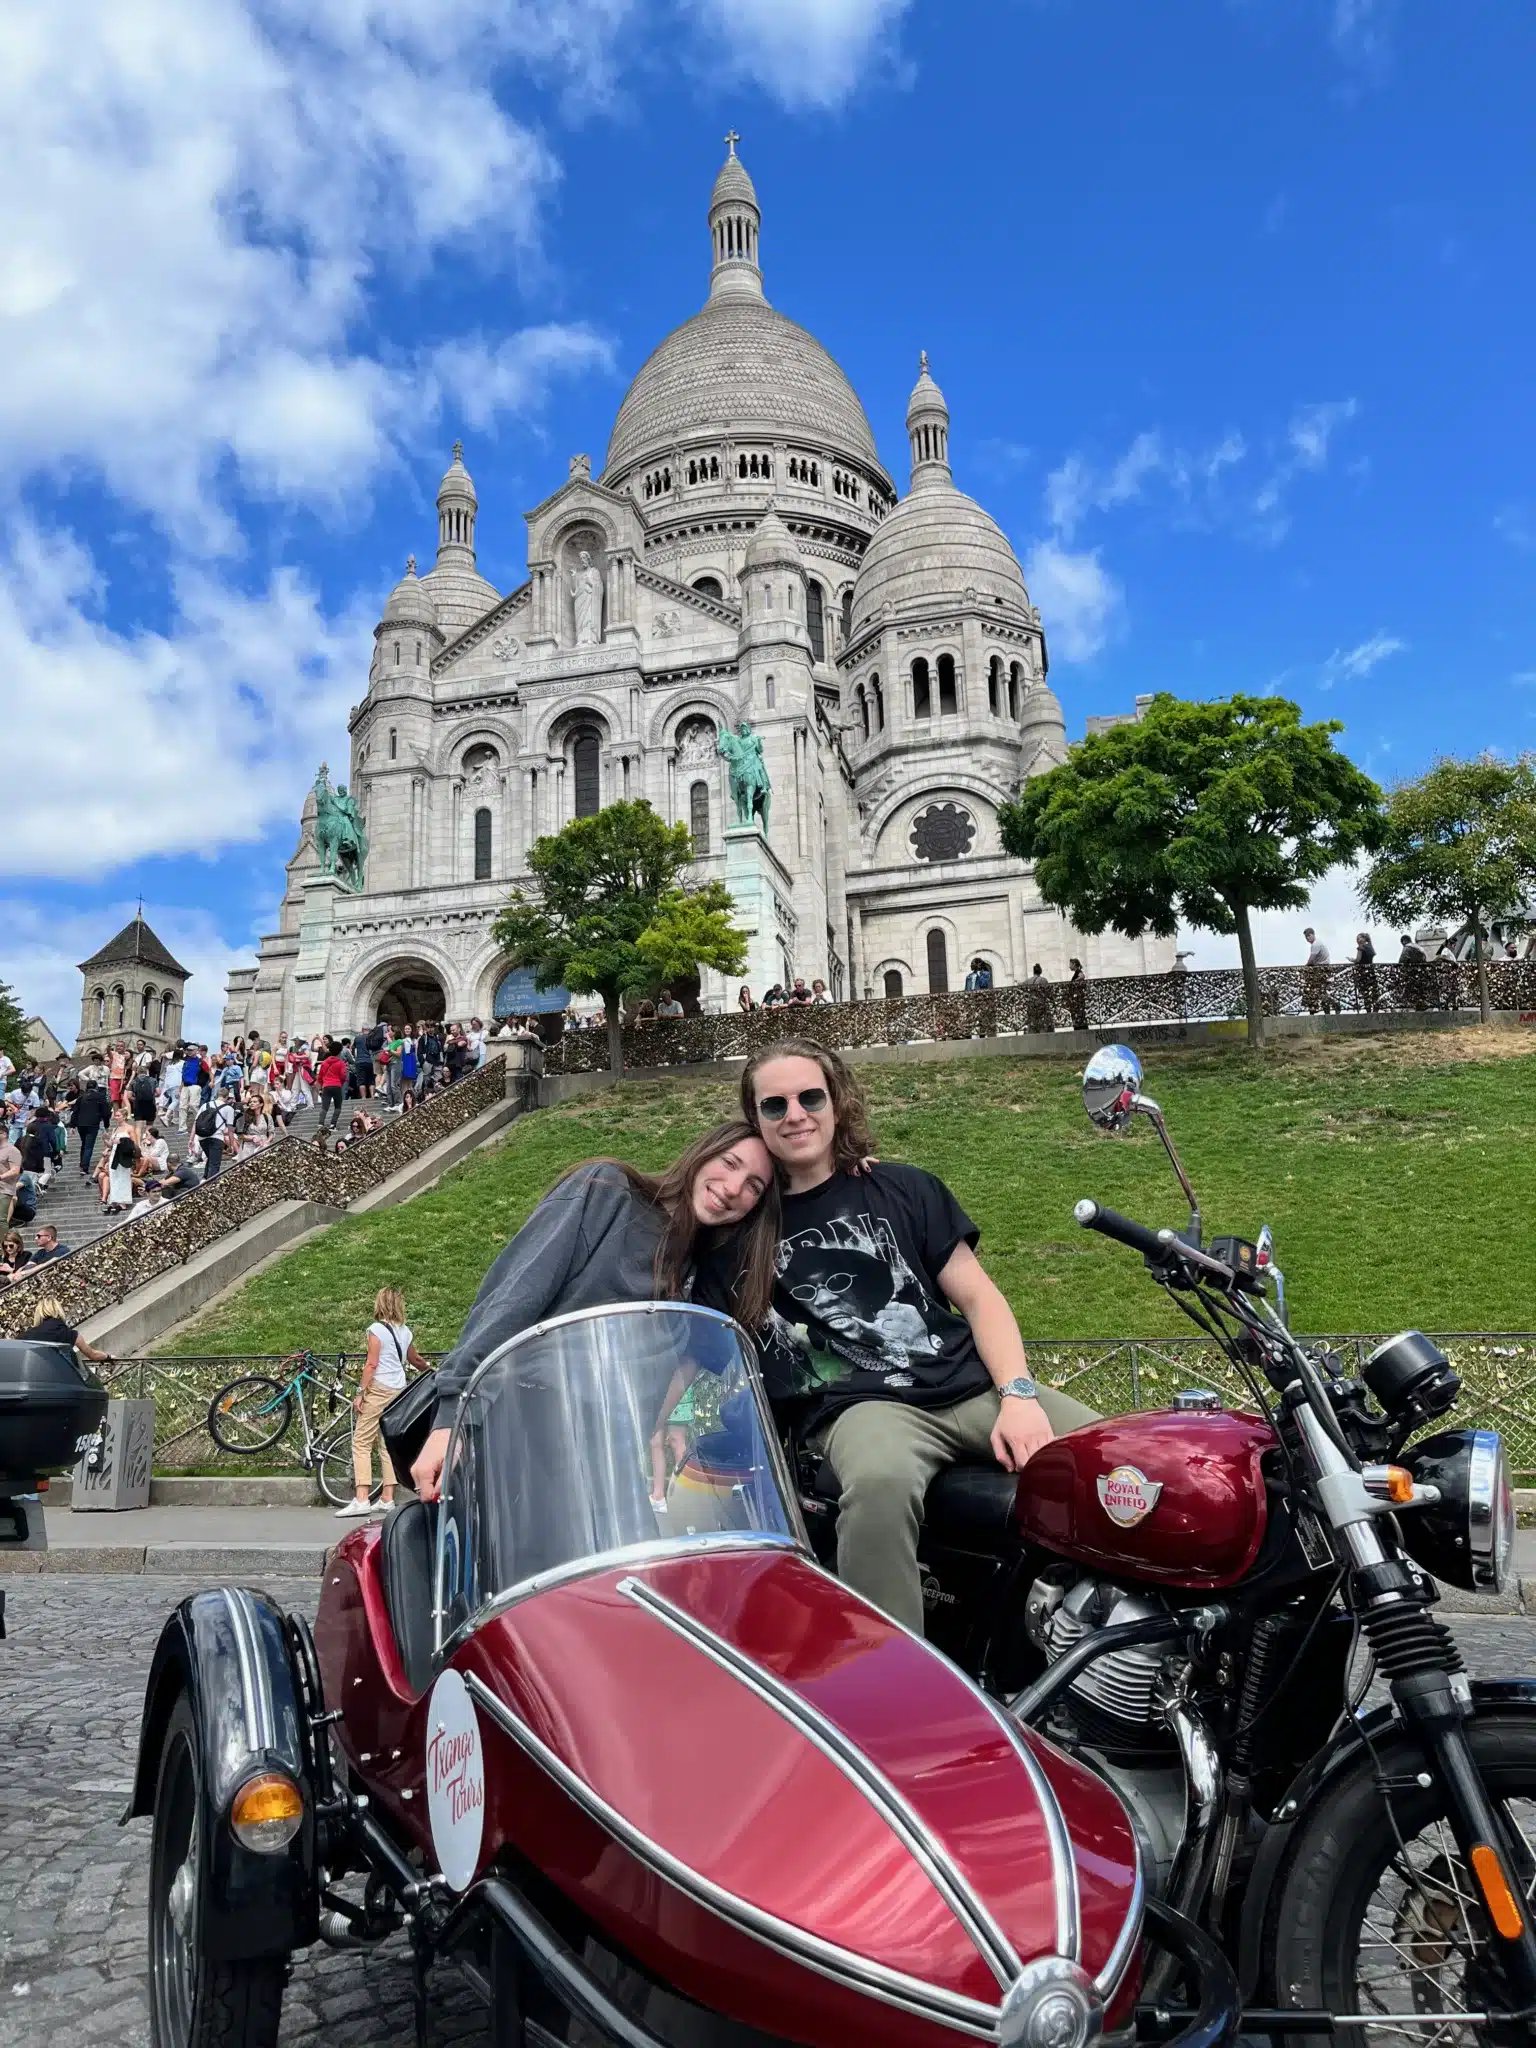 Visite the iconic Montmartre neighborhood on a thrilling sidecar motorcycle ride!